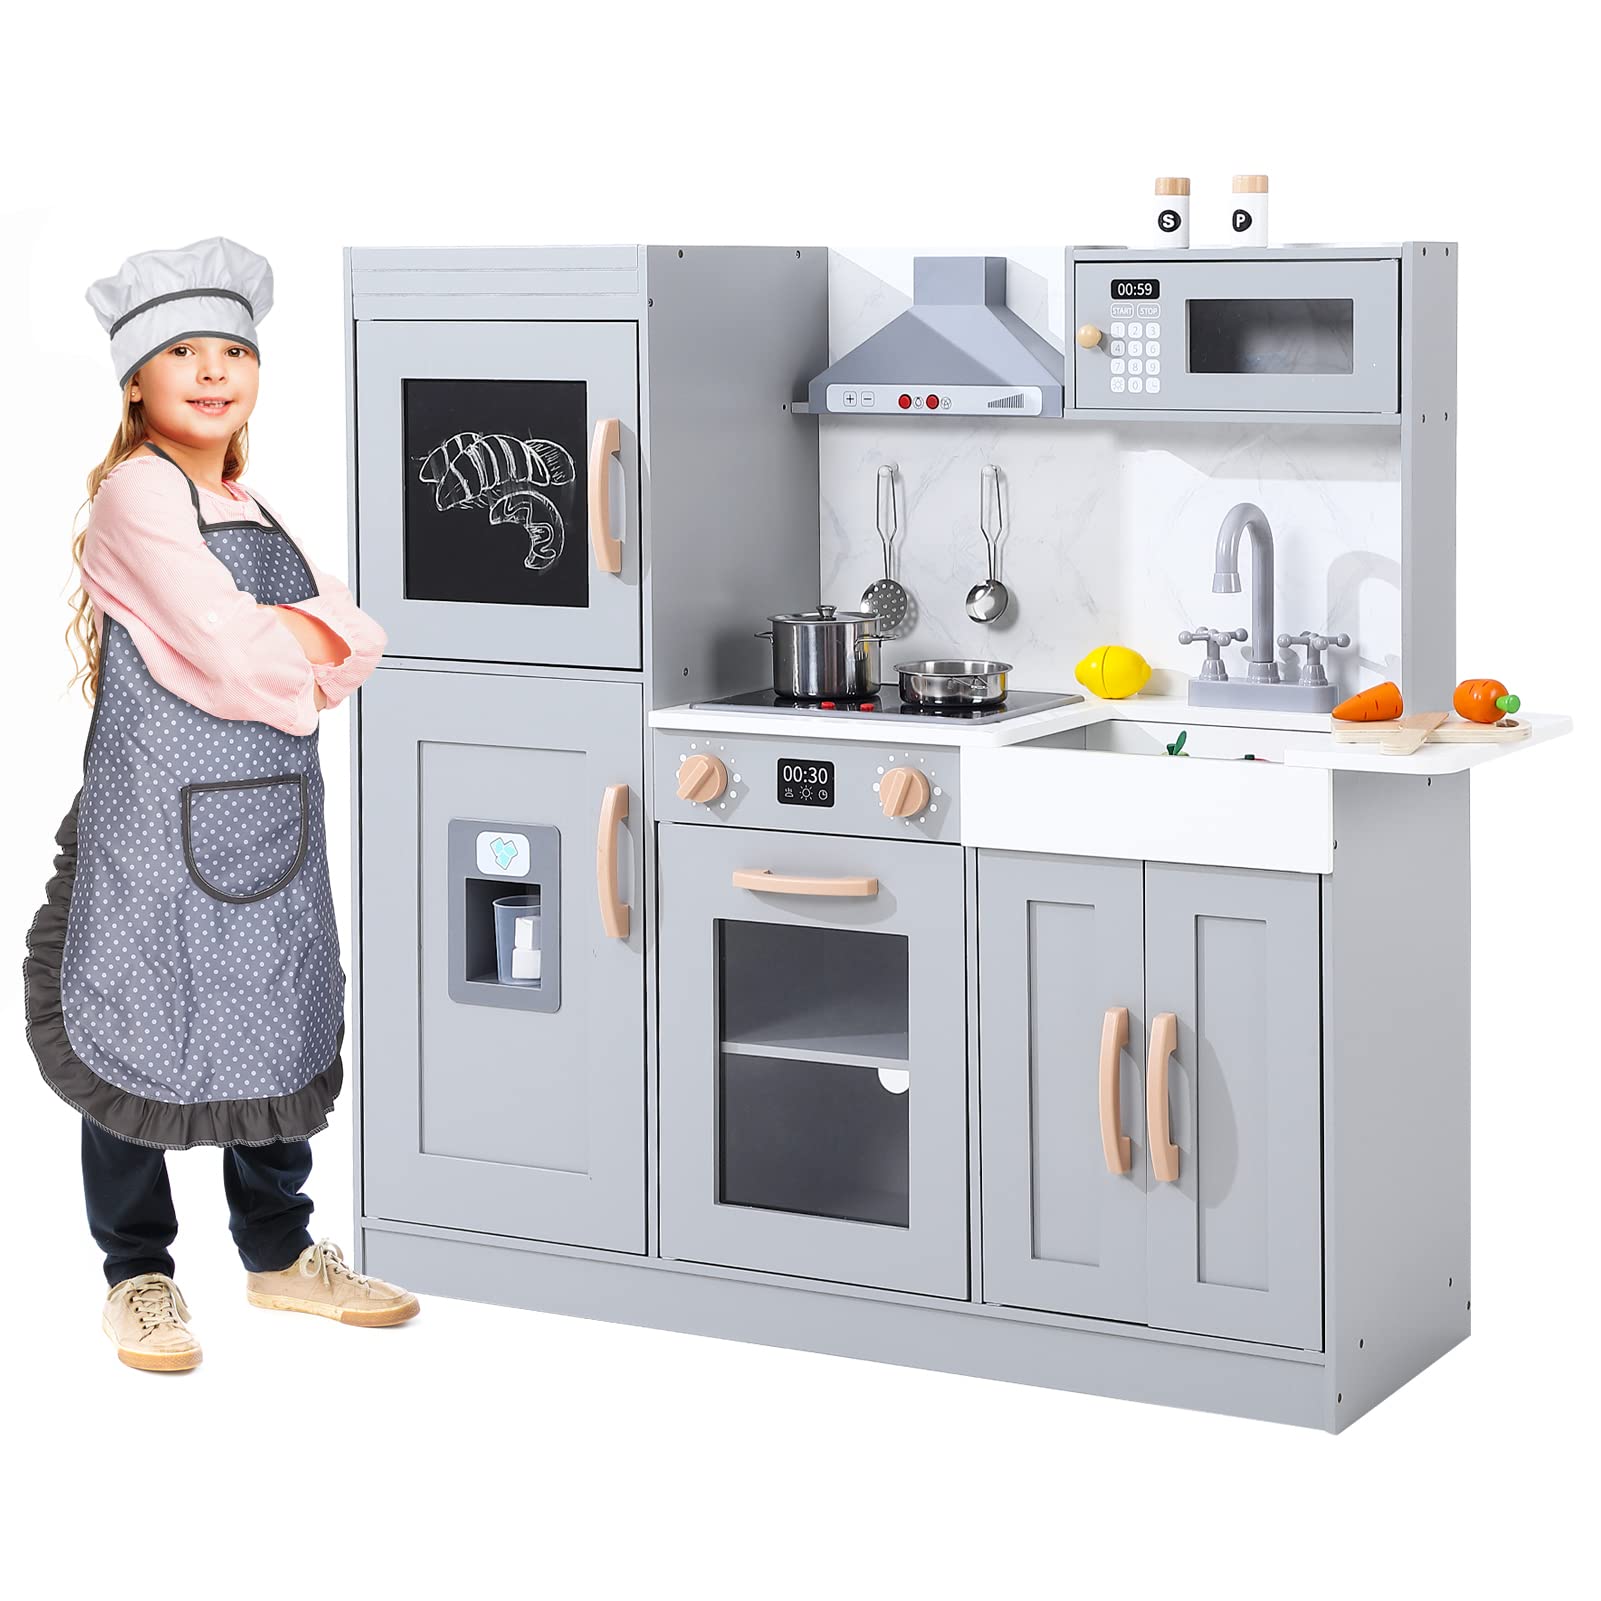 Kids Kitchen Playset, Wooden Chef Pretend Play Set with 20 PCS Cookware Accessories, Wooden Cookware Pretend with Ice Maker, Microwave, Oven, Range Hood, Sink, Real Lights & Sounds拢卢Gray